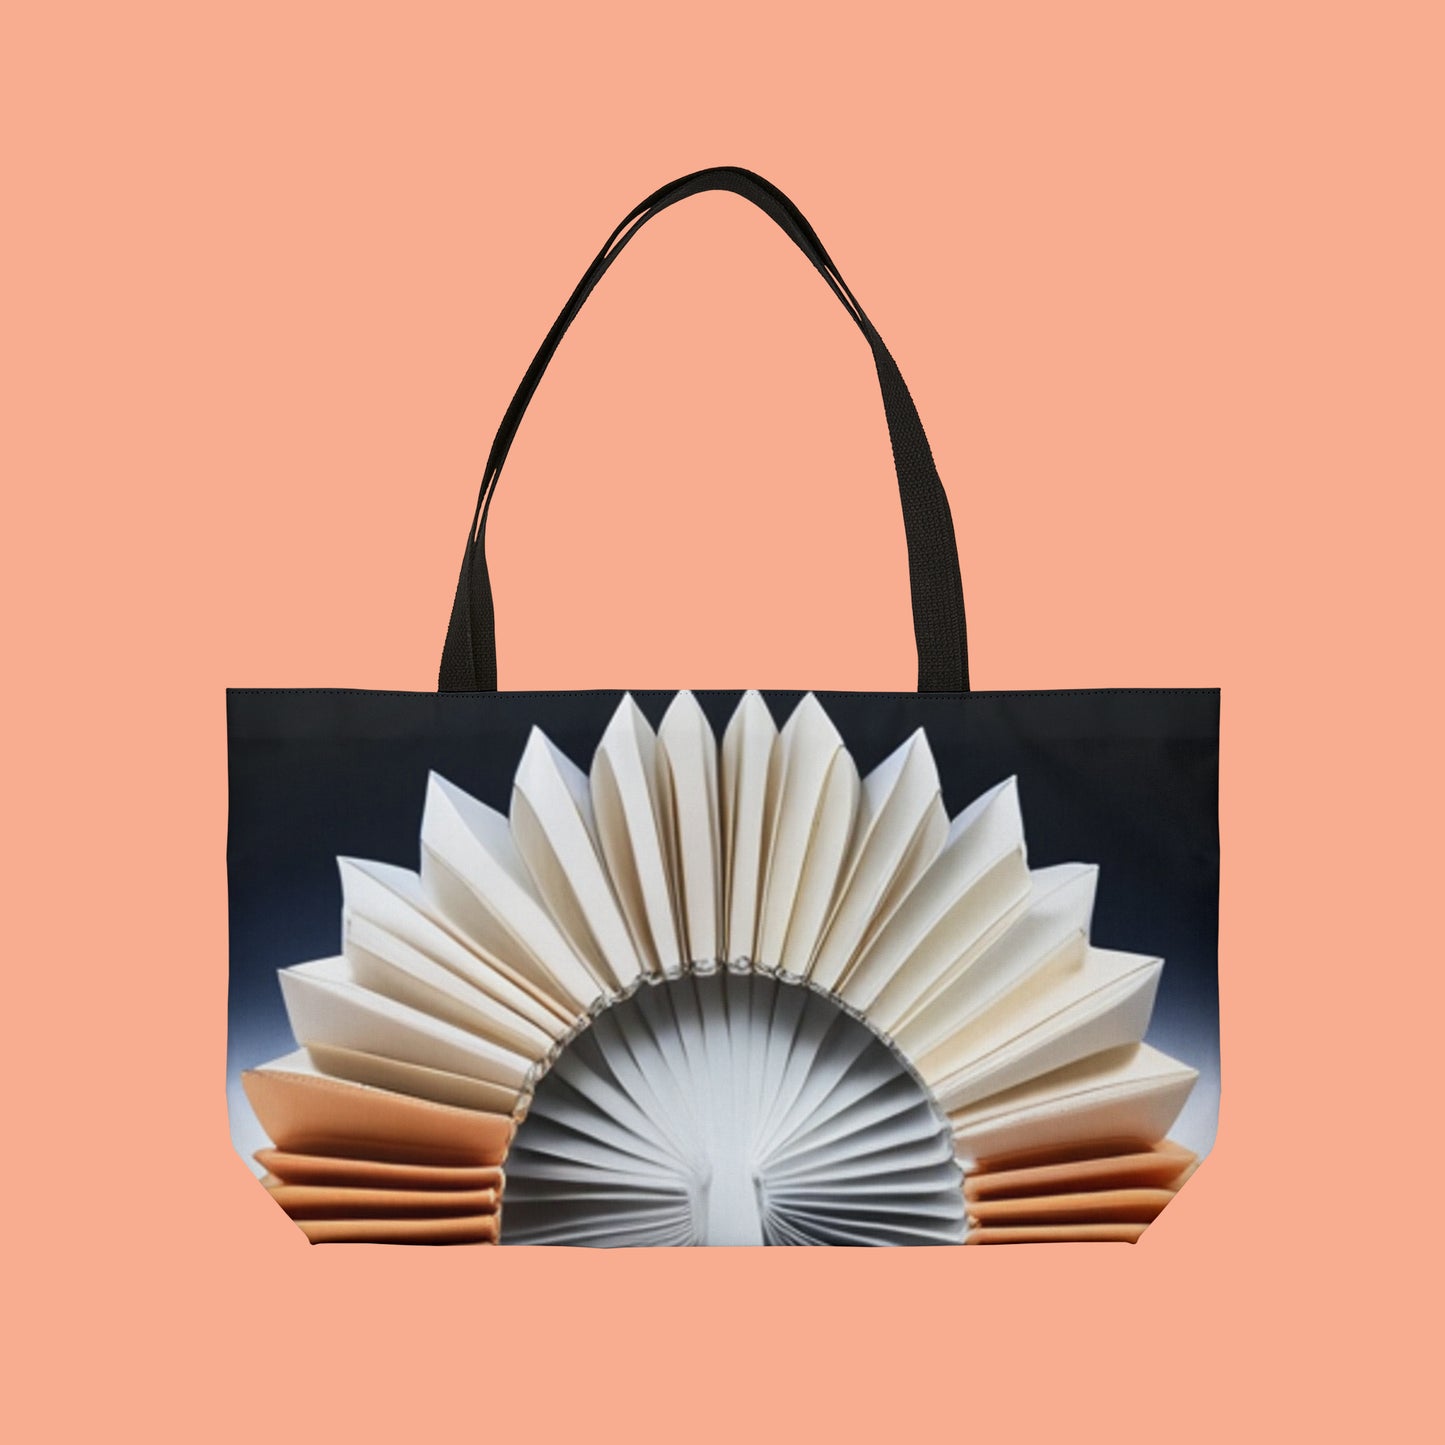 Origami inspired style design on this pretty Weekender Tote Bag.